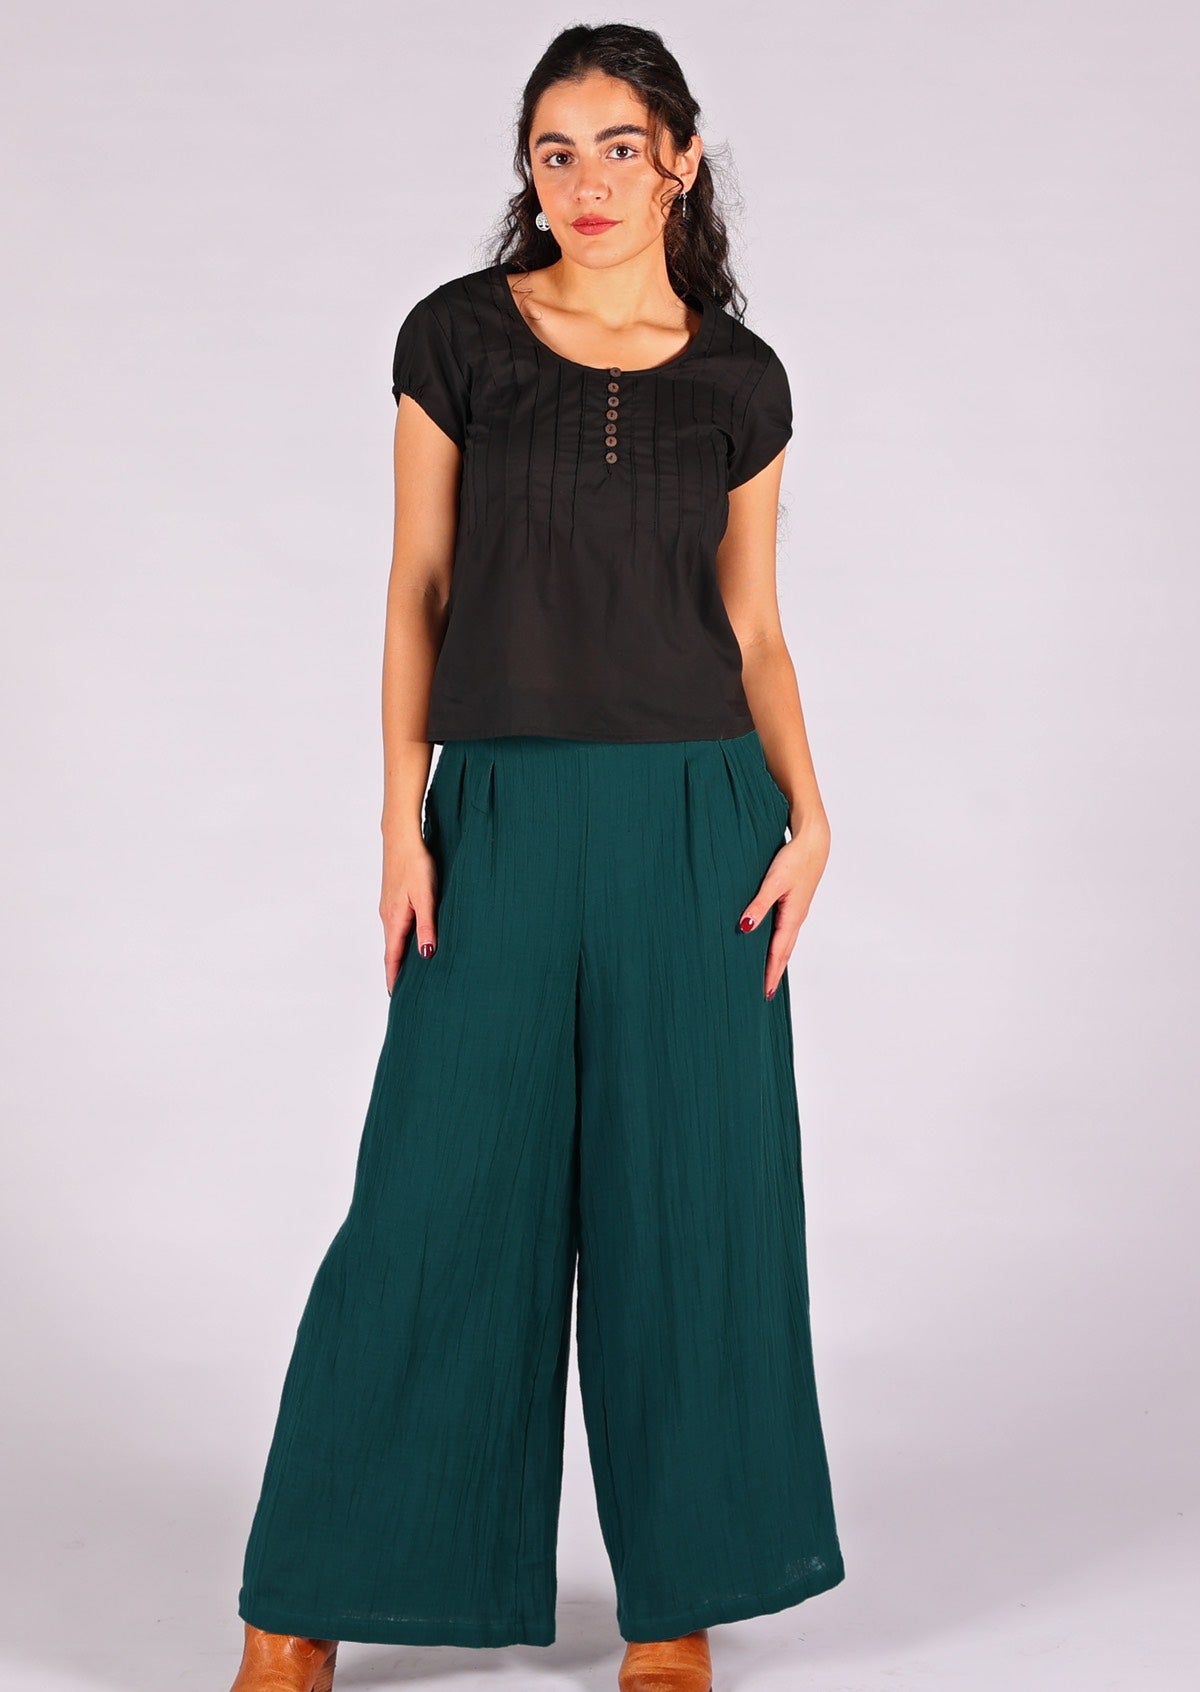 Lightweight cotton pants in gorgeous deep teal are great for any occasion